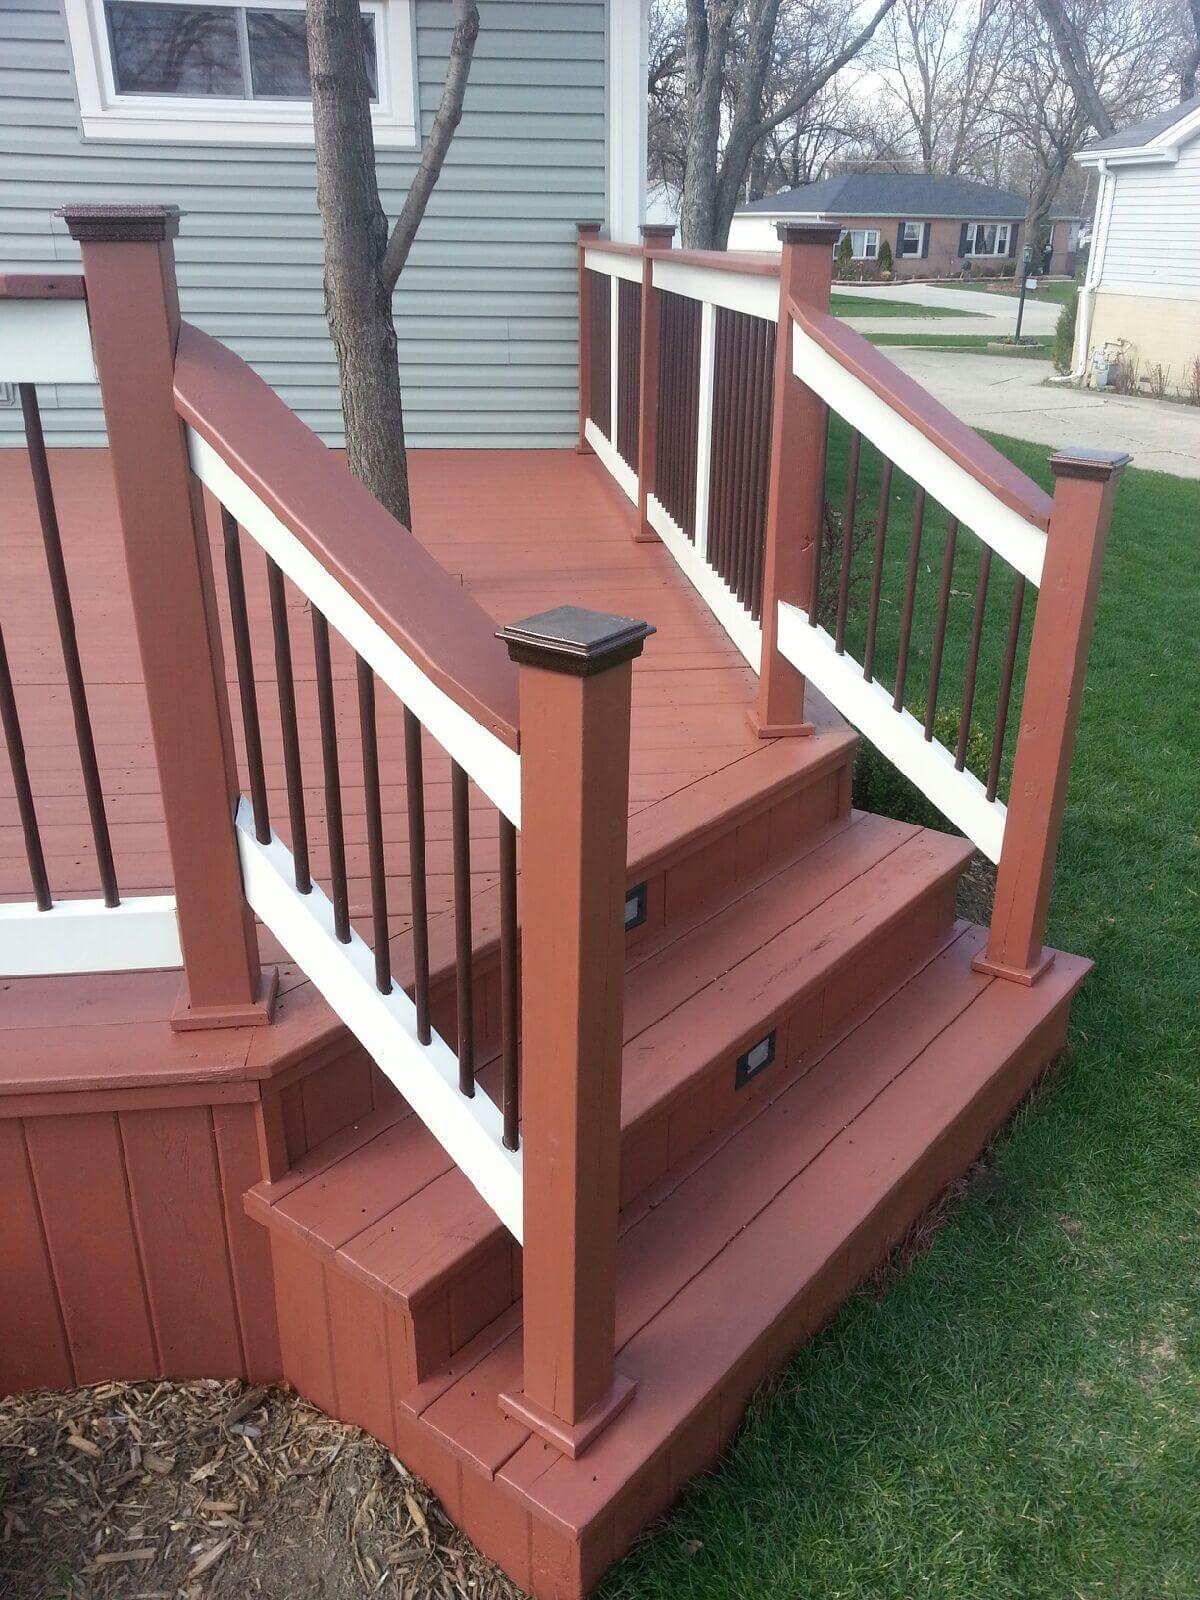 Repairs and maintenance for your deck, fence, and exterior wood staining. - Deck Staining Glendale Heights - Deck Cleaning Services